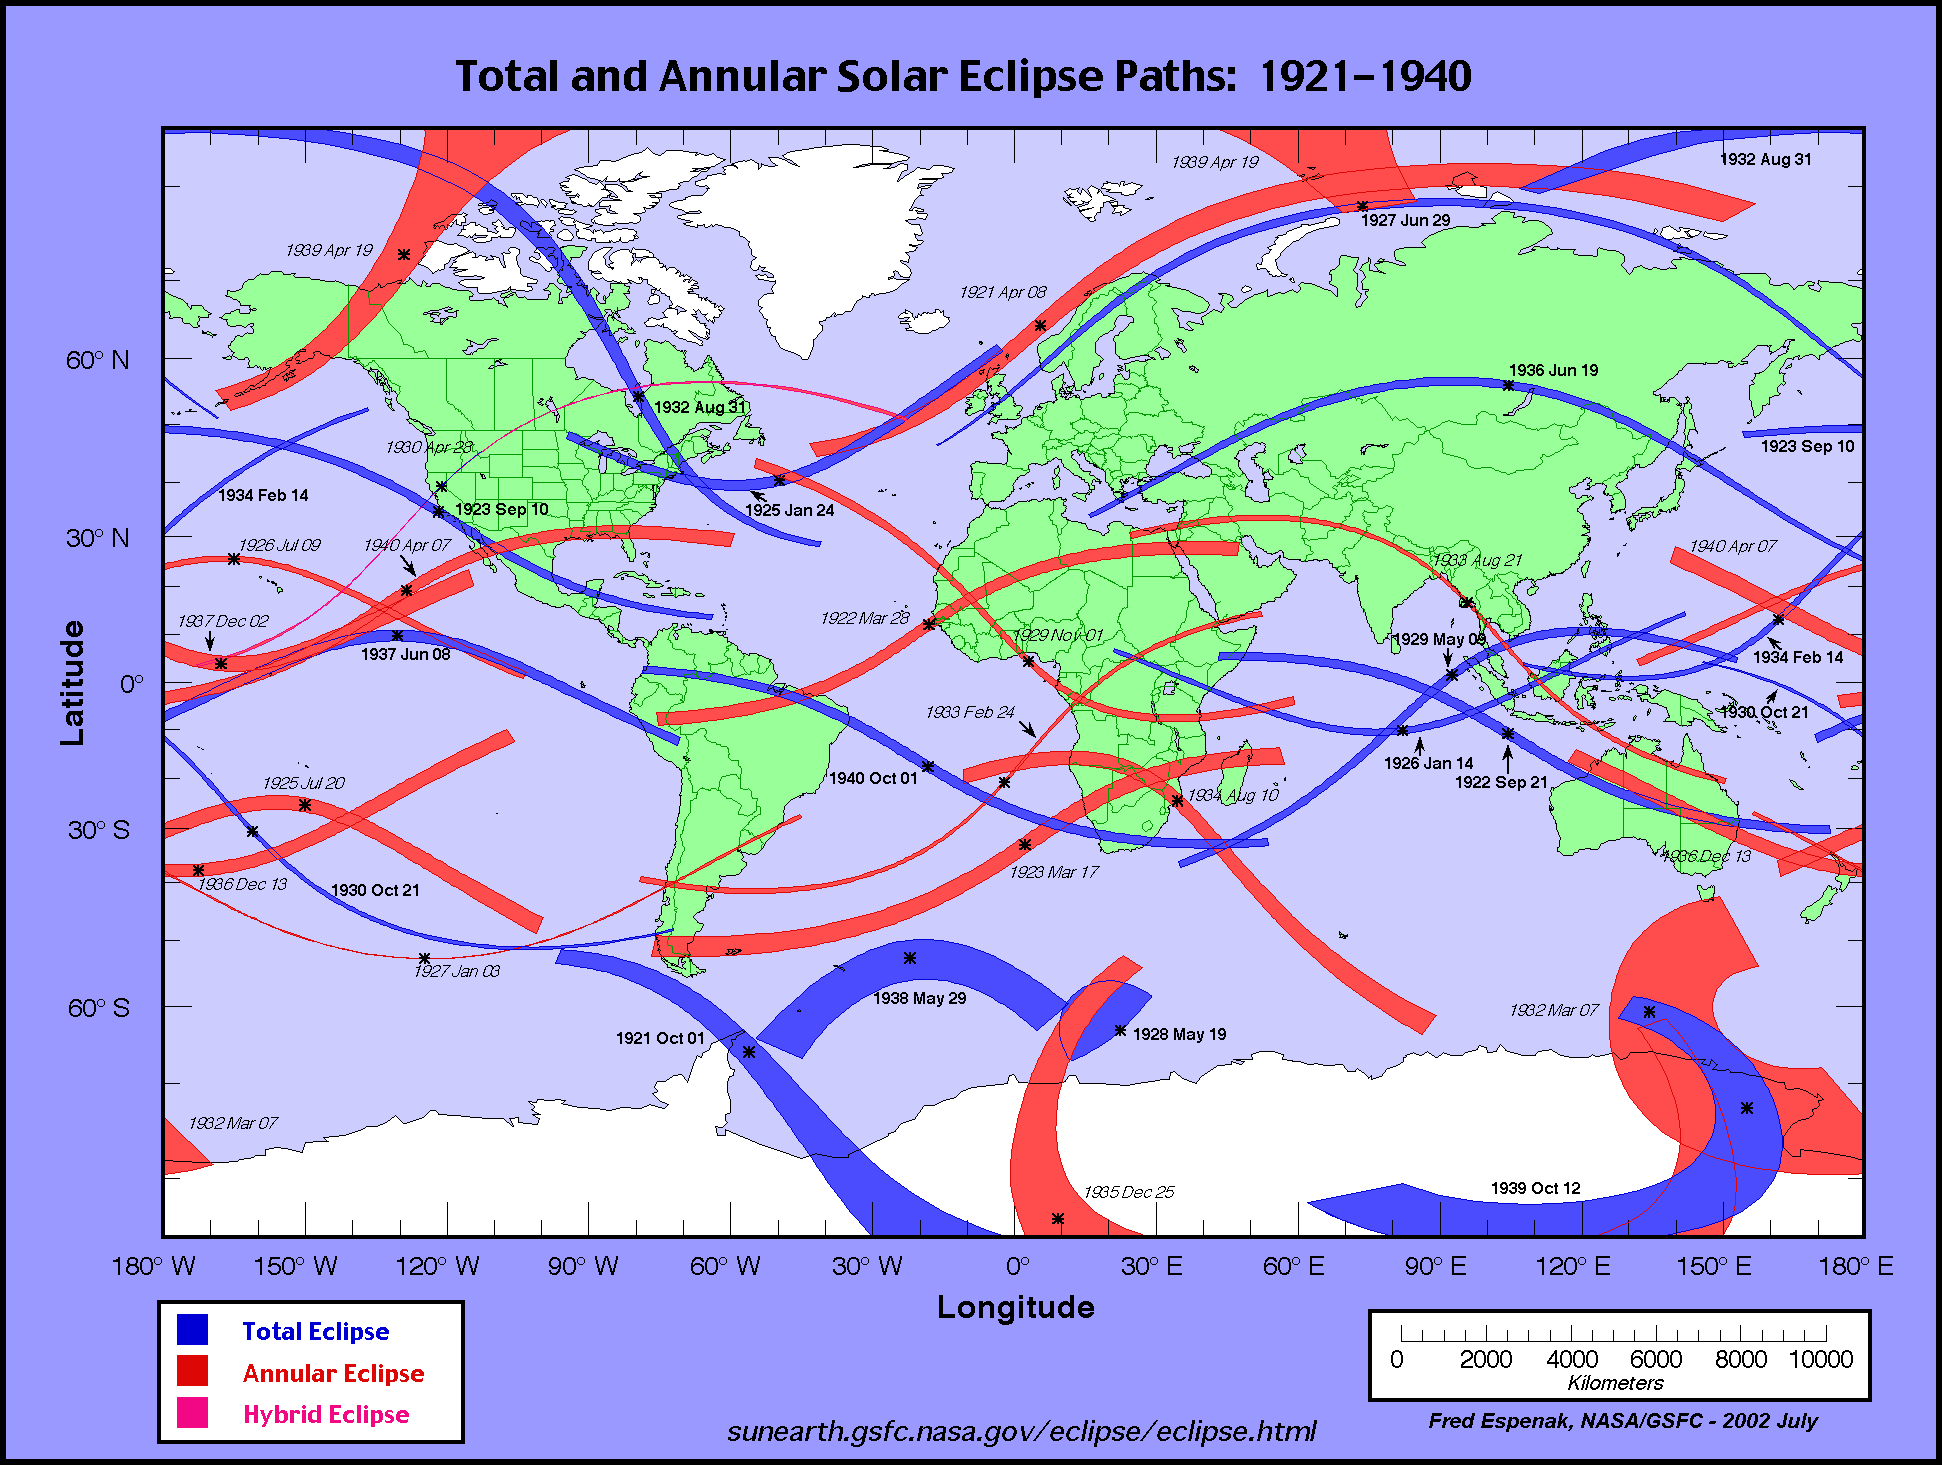 Calendar and solar eclipse maps from 1921 to 1940